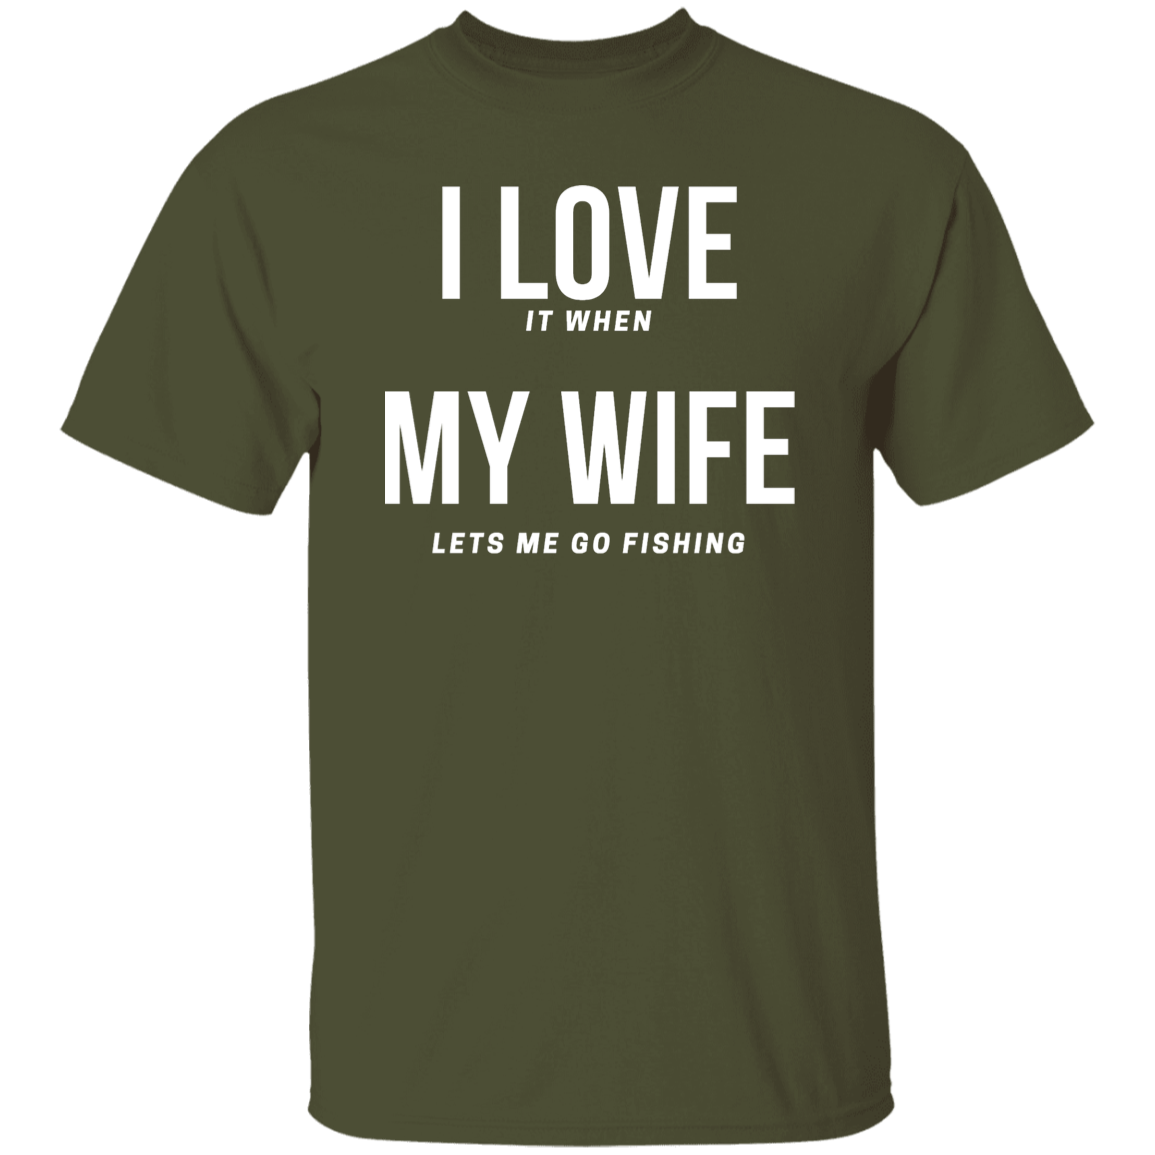 I Love My Wife. T-Shirt WI